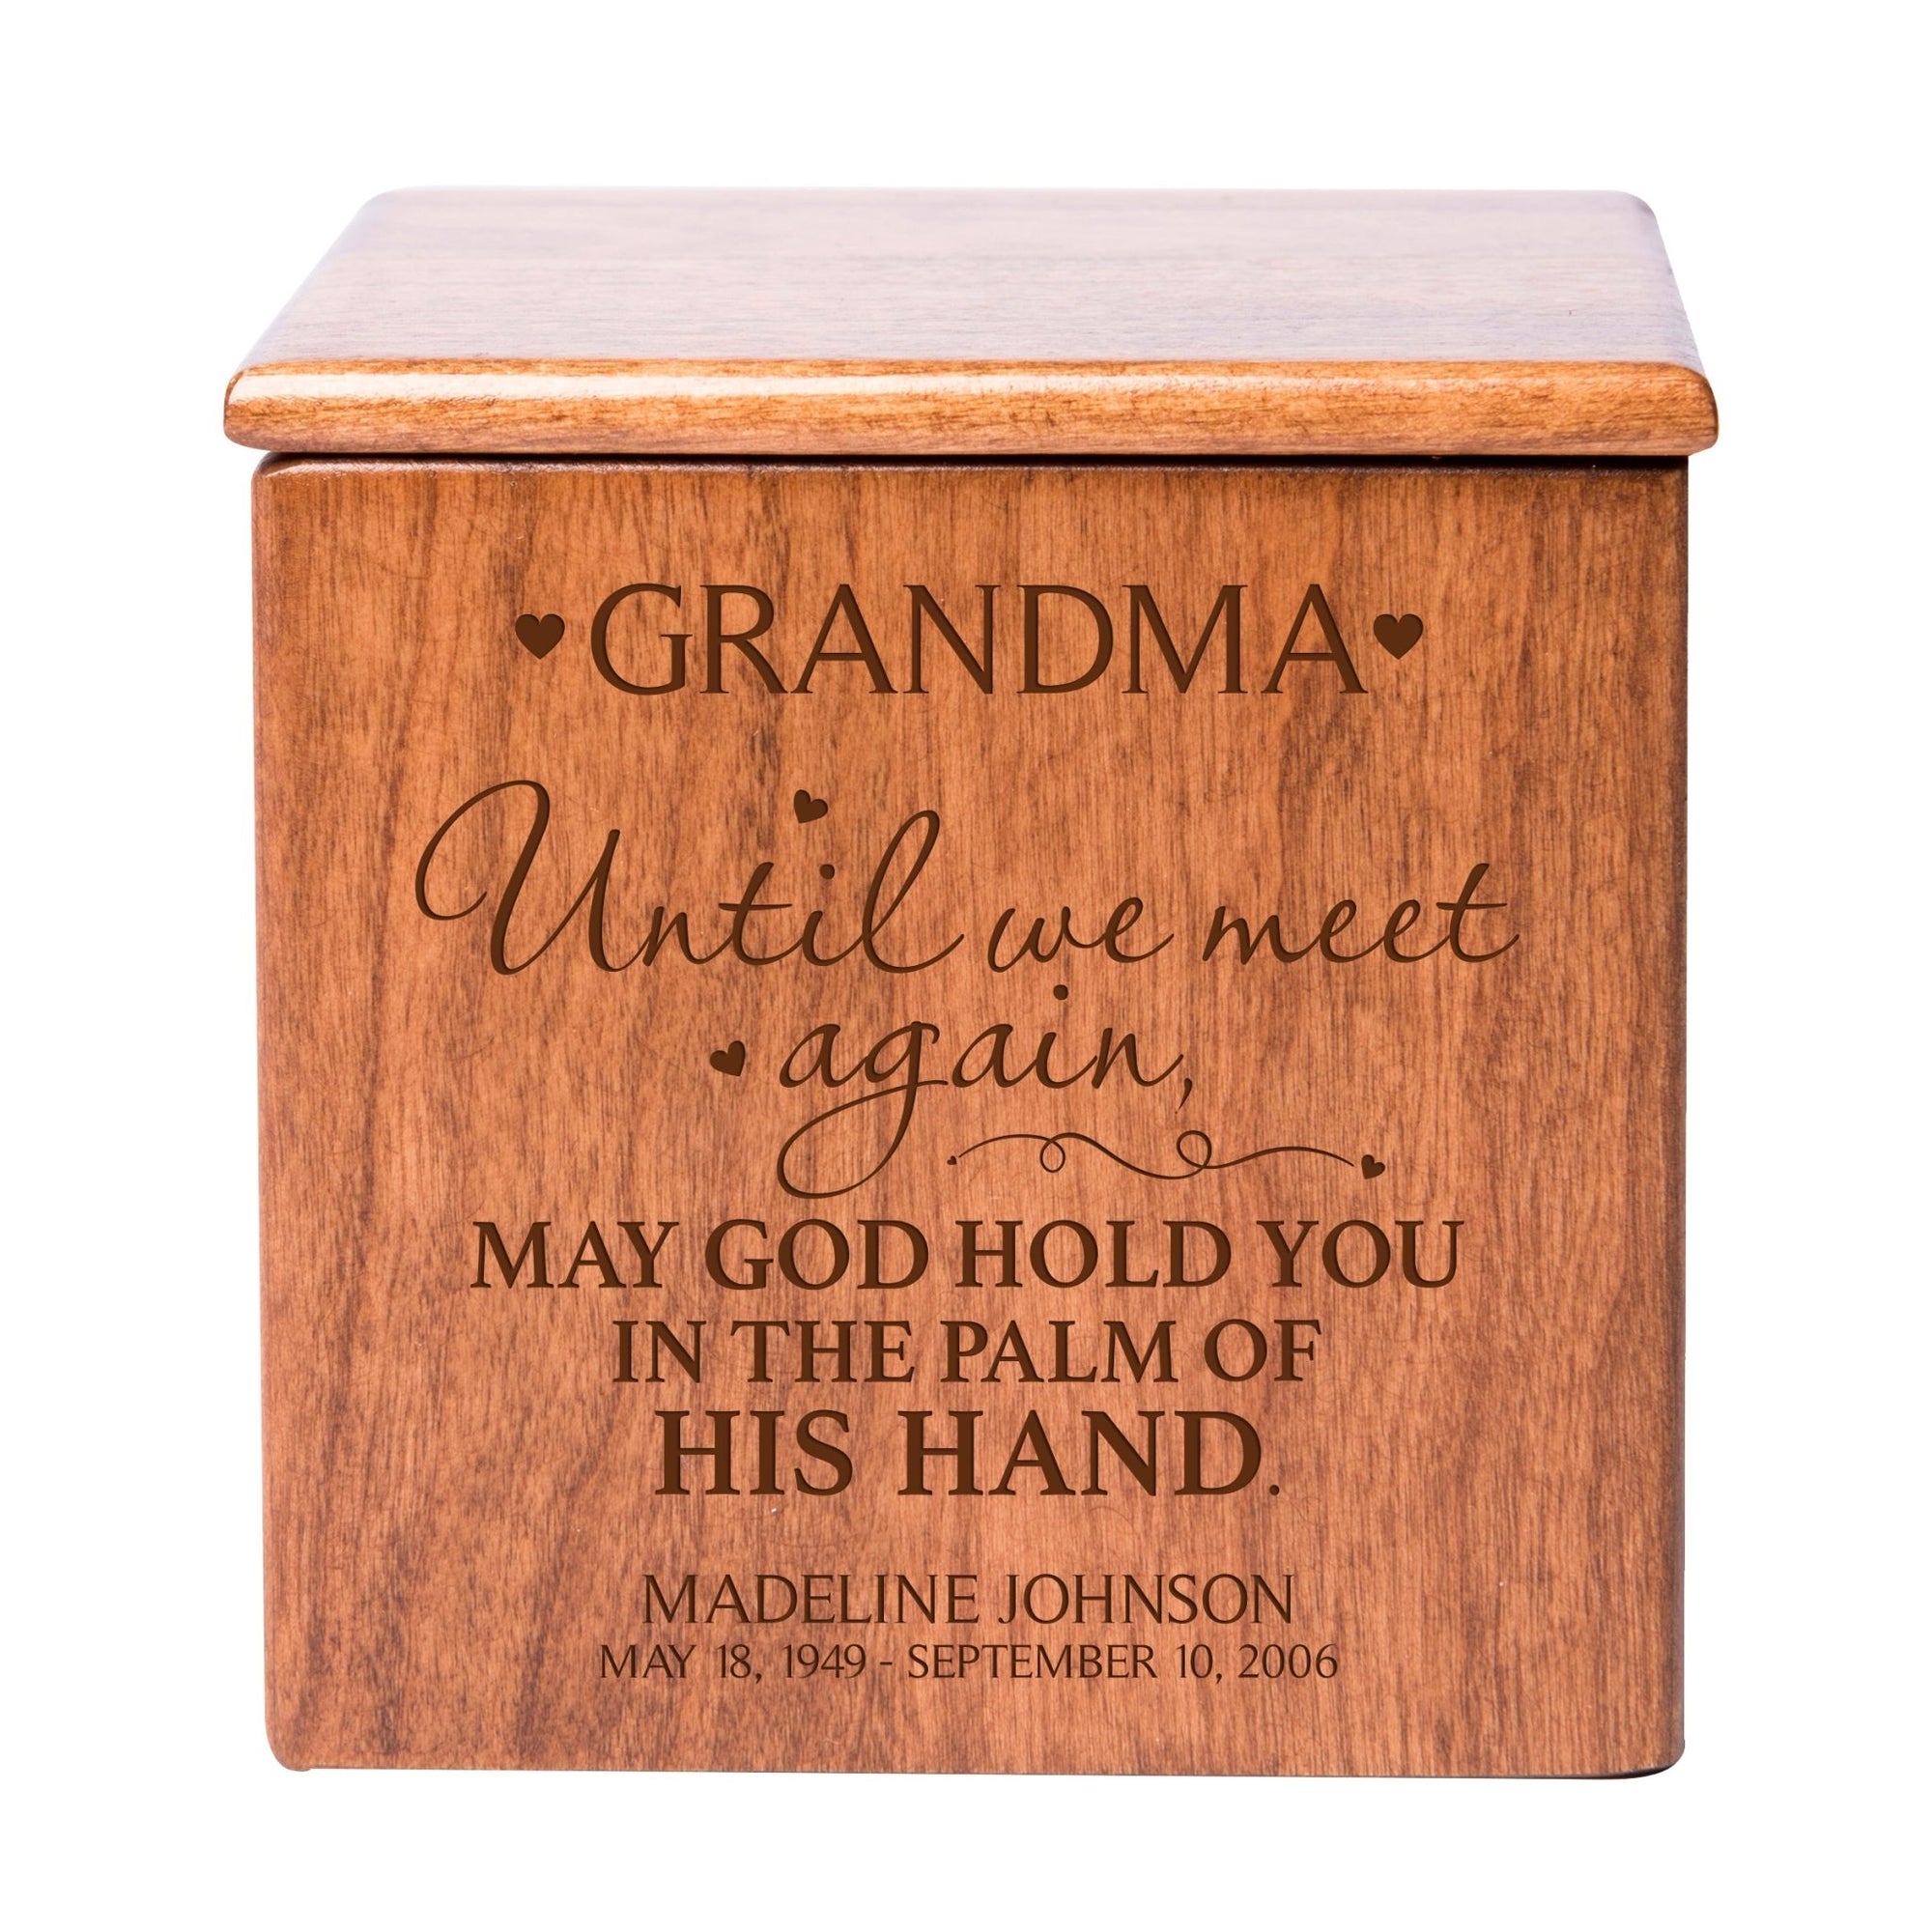 Custom Engraved Memorial 4.5x4.5in Cremation Urn Box Holds 49 Cu Inches Of Human Ashes (Until We Meet Again Grandma) Funeral and Condolence Keepsake - LifeSong Milestones